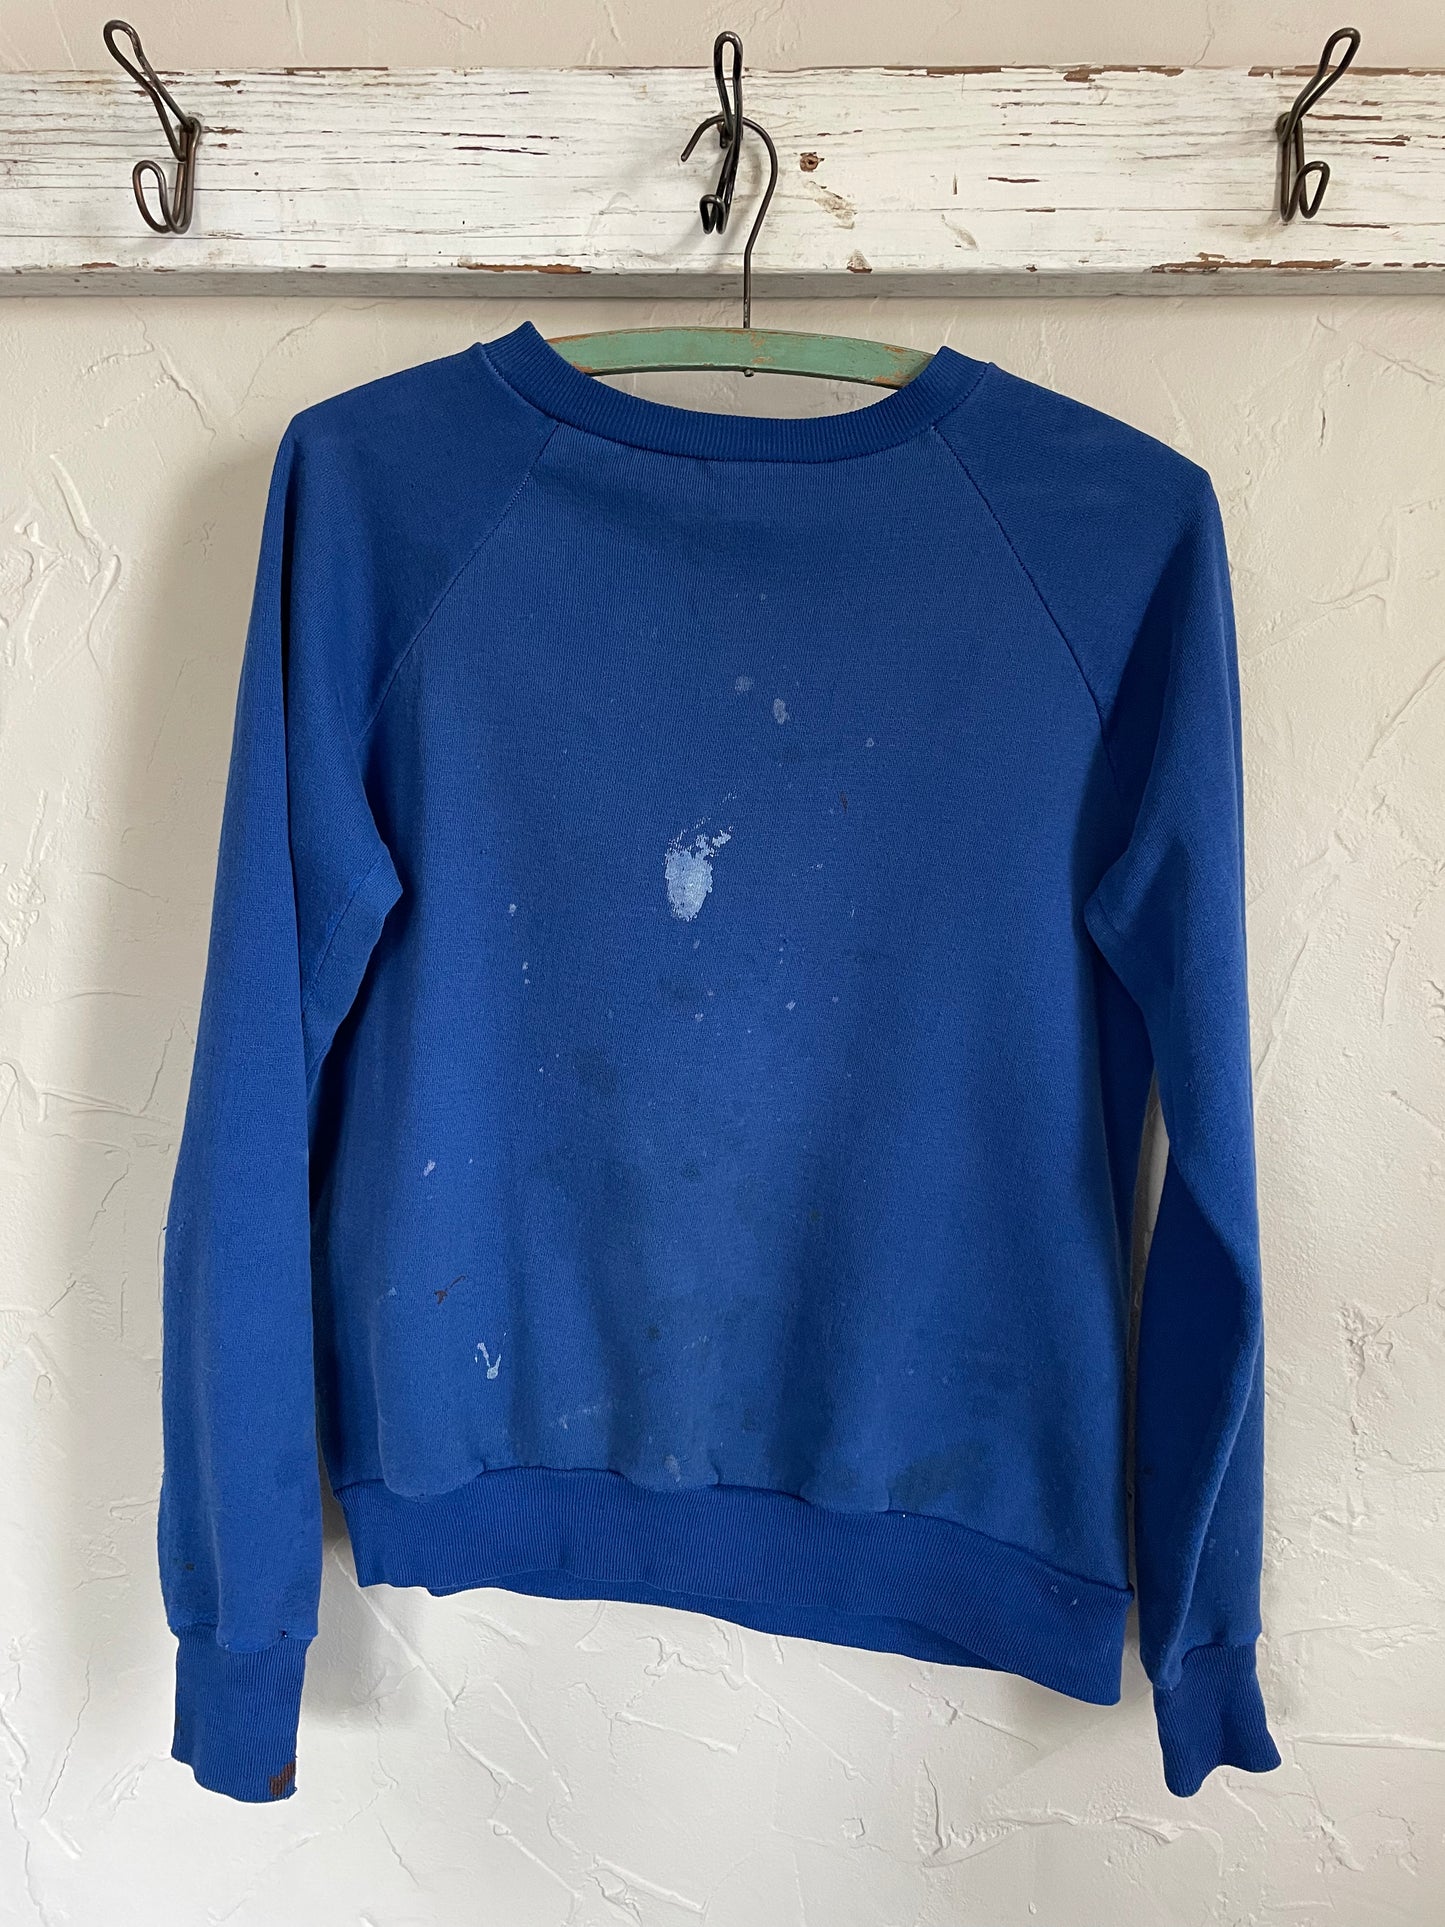 80s Royal Blue Paint Stained Sweatshirt